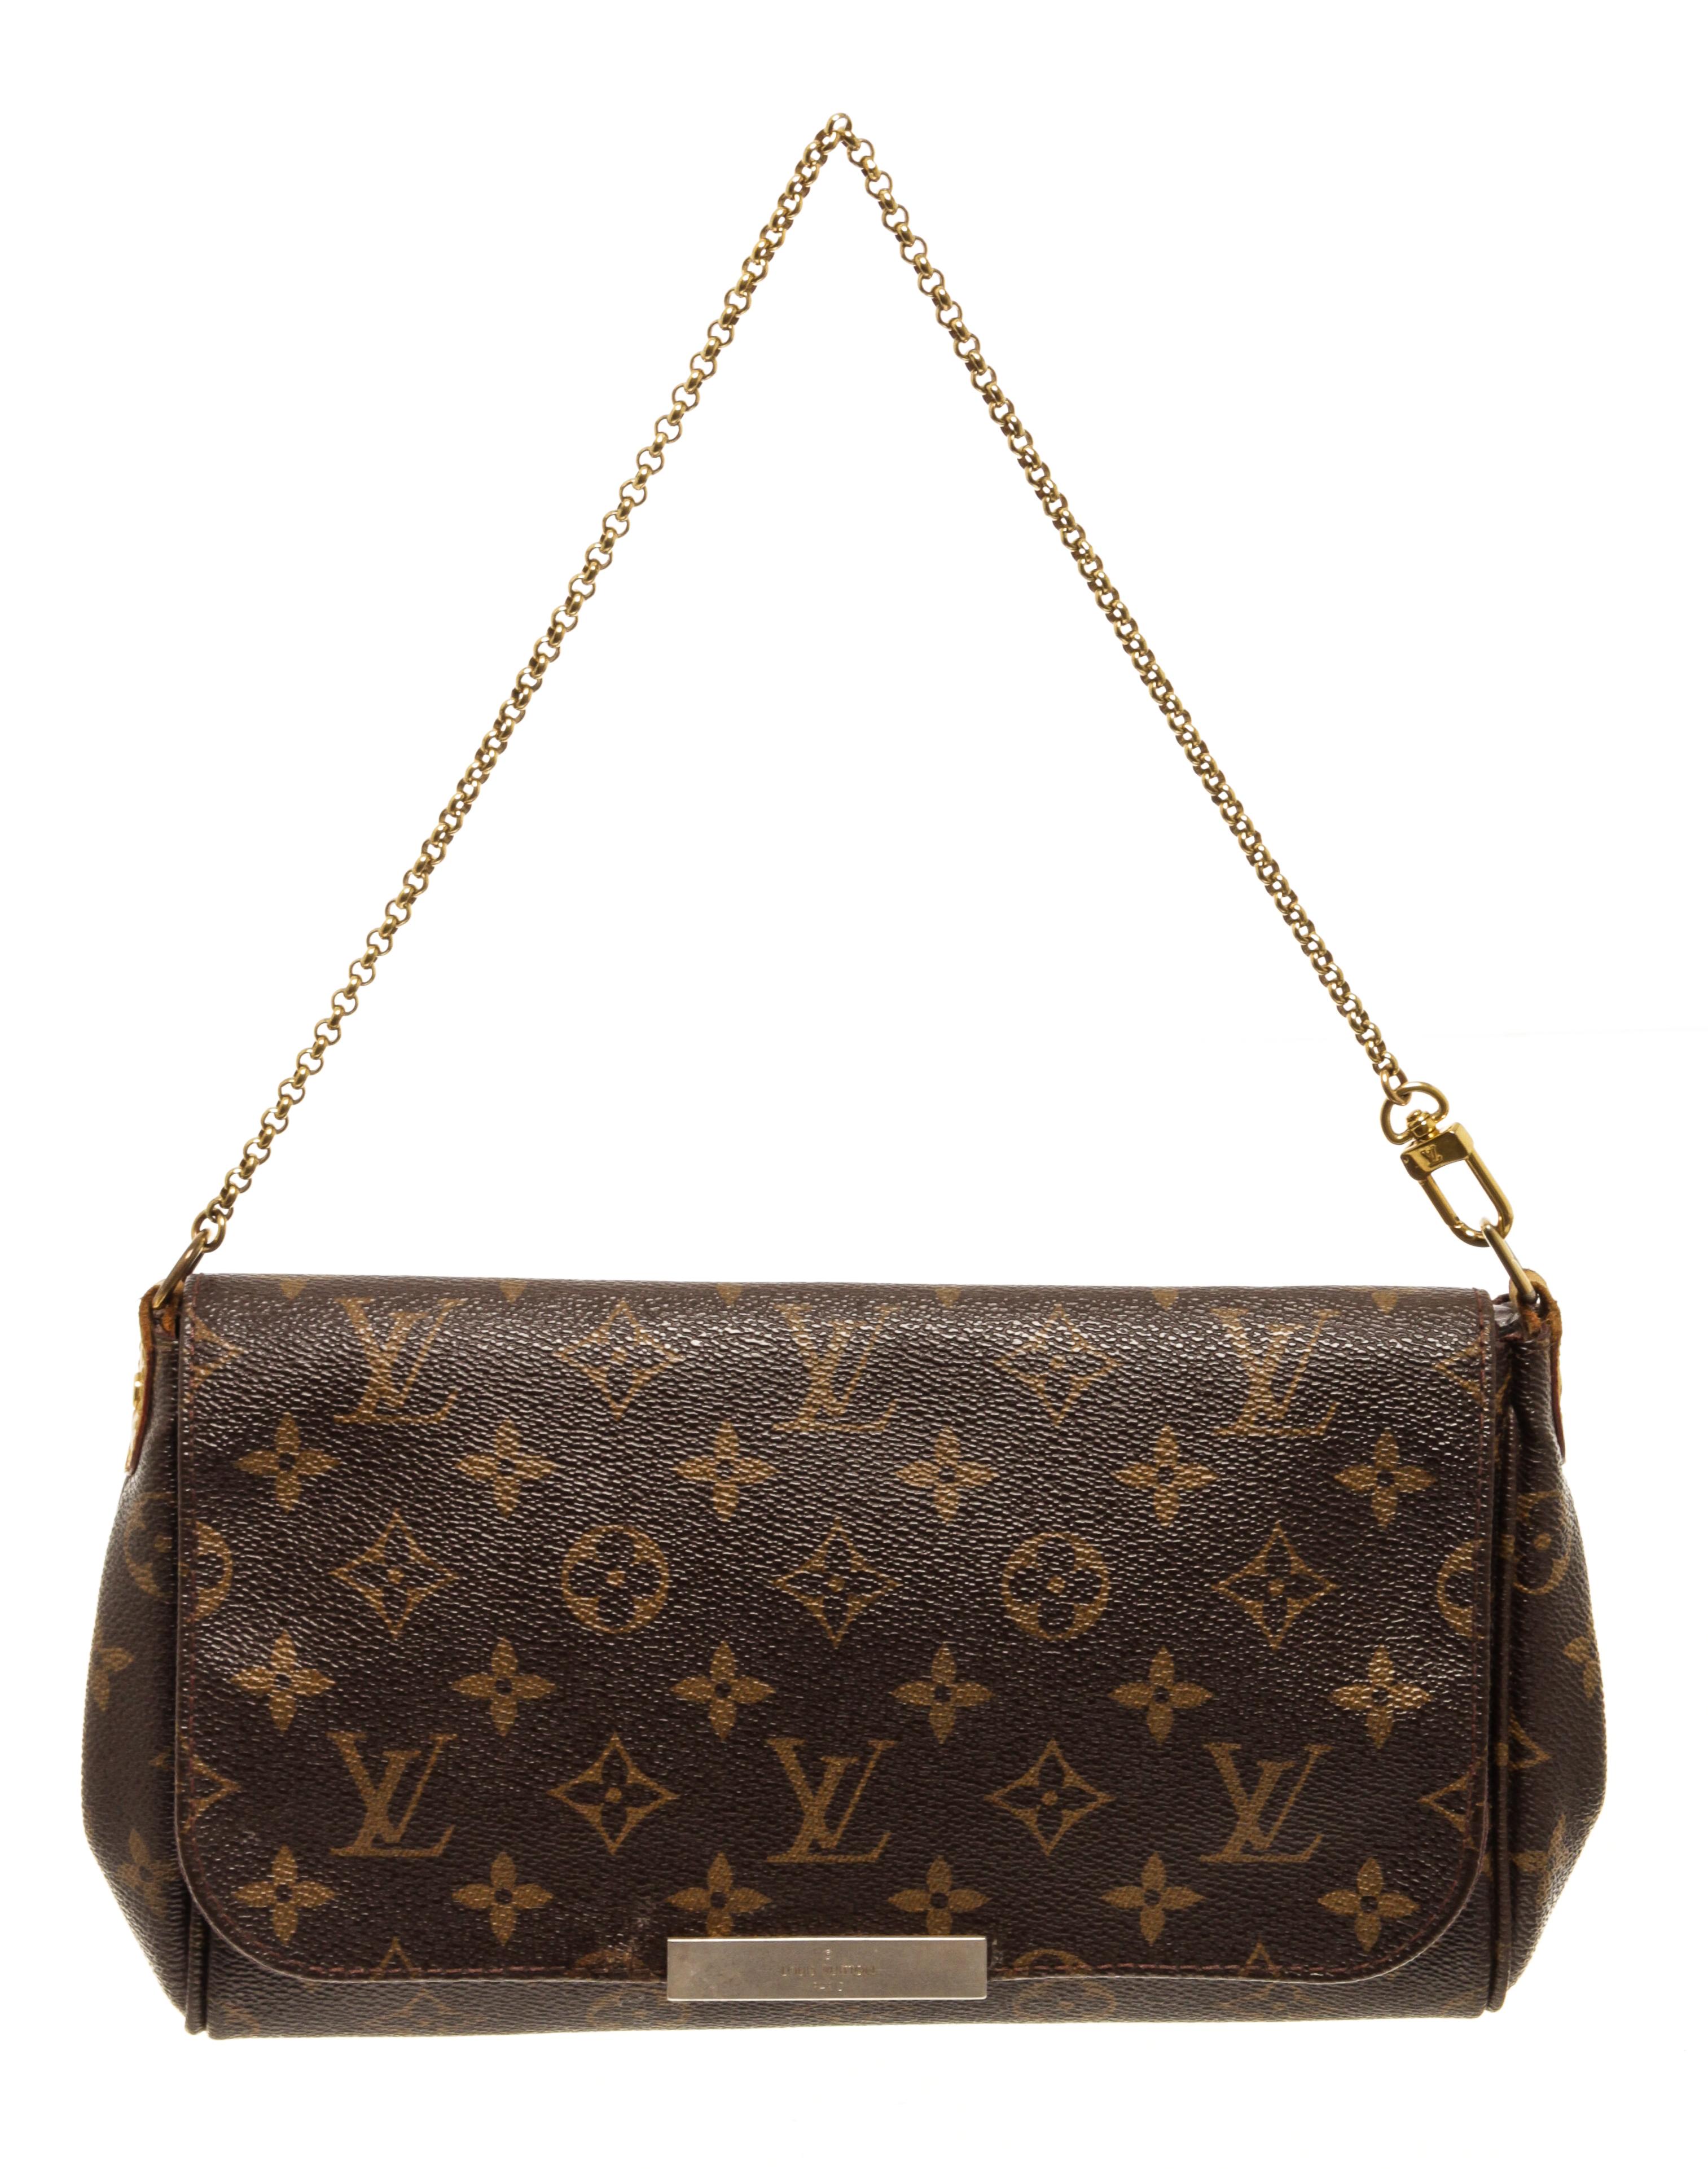 Louis Vuitton Favorite PM Brown Monogram Canvas Cross Body Bag with material Monogram Canvas, gold-tone hardware, interior slip pocket, burgundy canvas lining, Removeable chain strap and long leather shoulder strap and flap closure.

74960MSC.